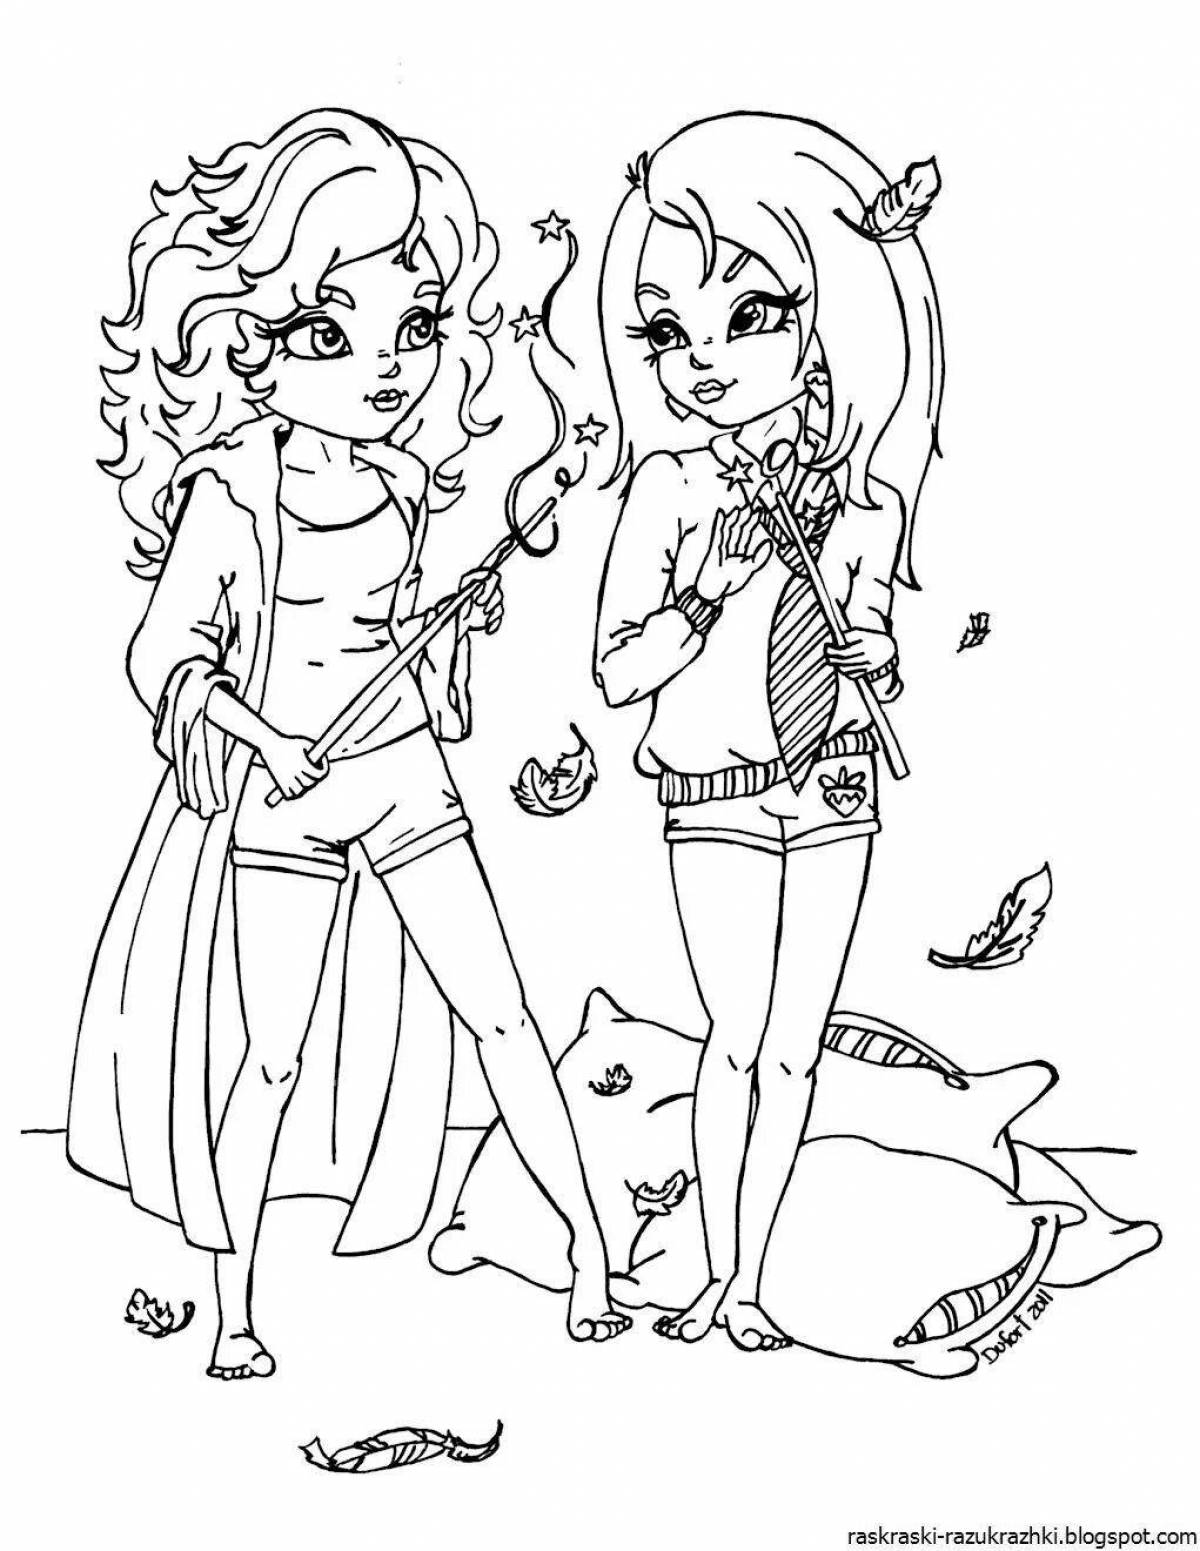 Coloring page charming girls from lp